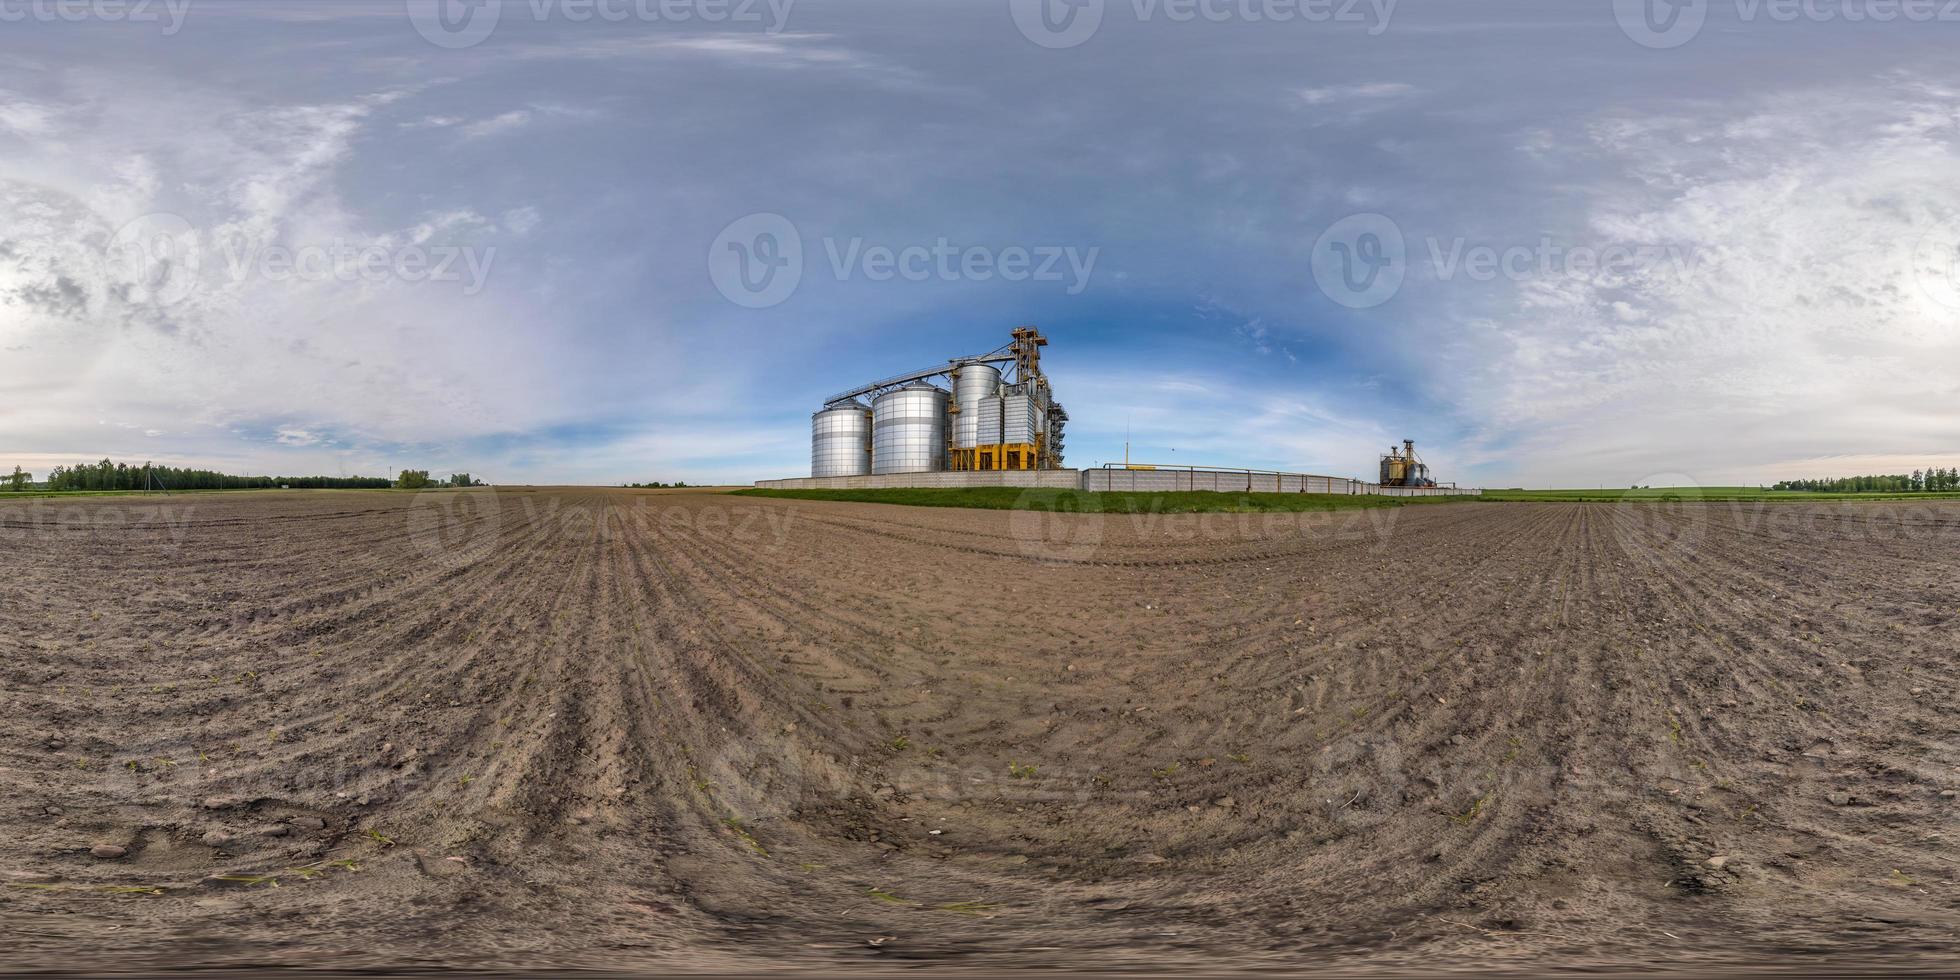 full seamless spherical hdri panorama 360 degrees angle view near silver silos for drying cleaning and storage of agricultural products  in equirectangular projection, ready for VR AR virtual reality photo